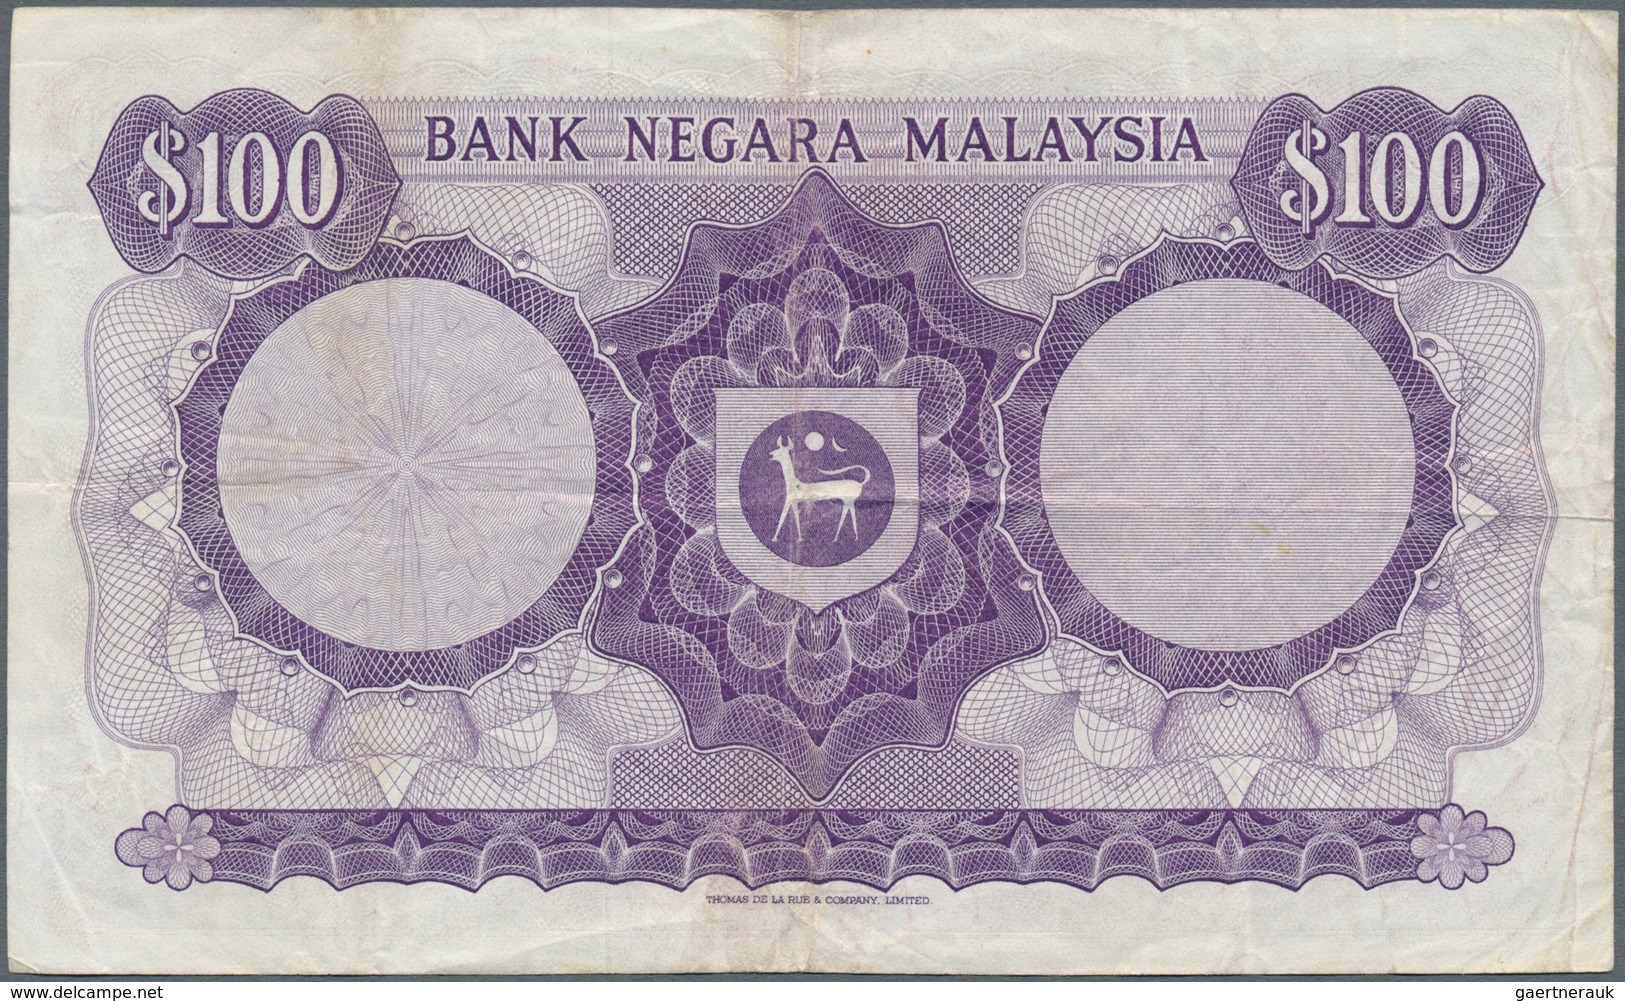 01987 Malaysia: 100 Ringgit ND P. 11 In Used Condition With Folds And Creases, Border Tear (1cm) At Upper - Malasia